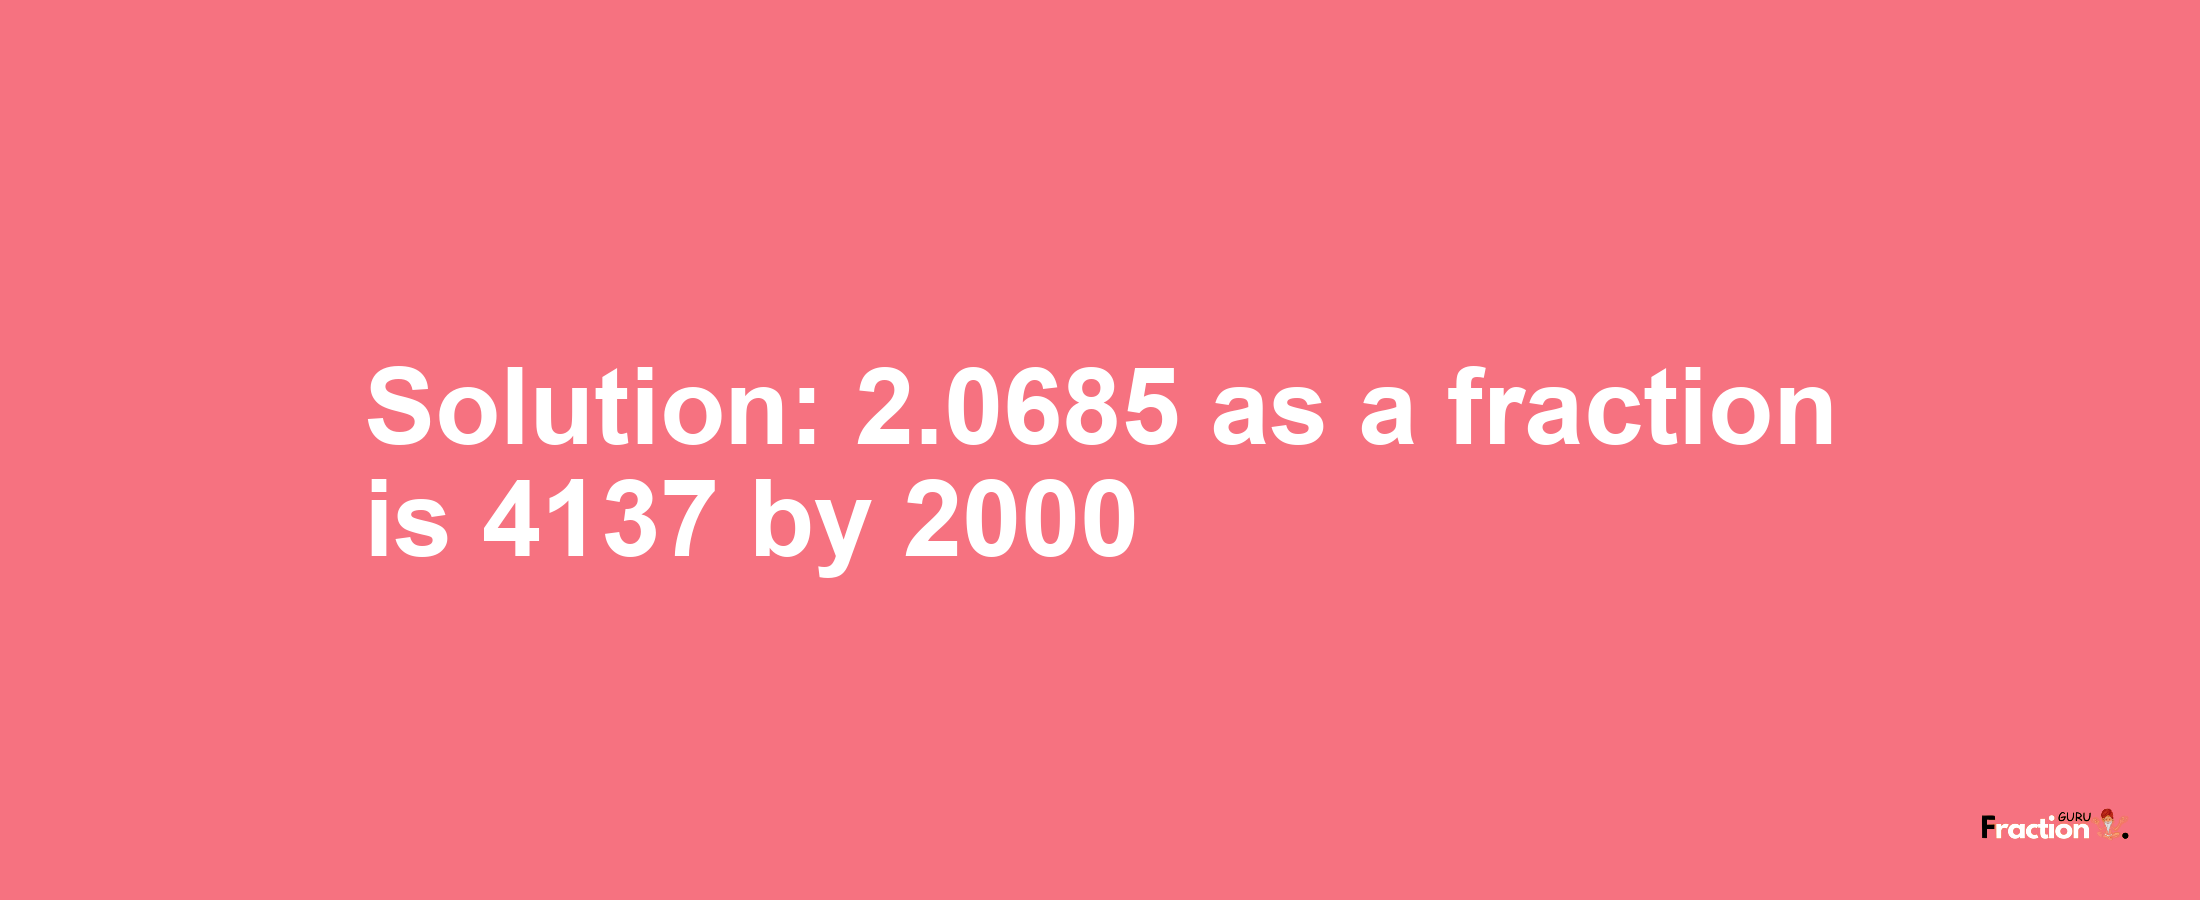 Solution:2.0685 as a fraction is 4137/2000